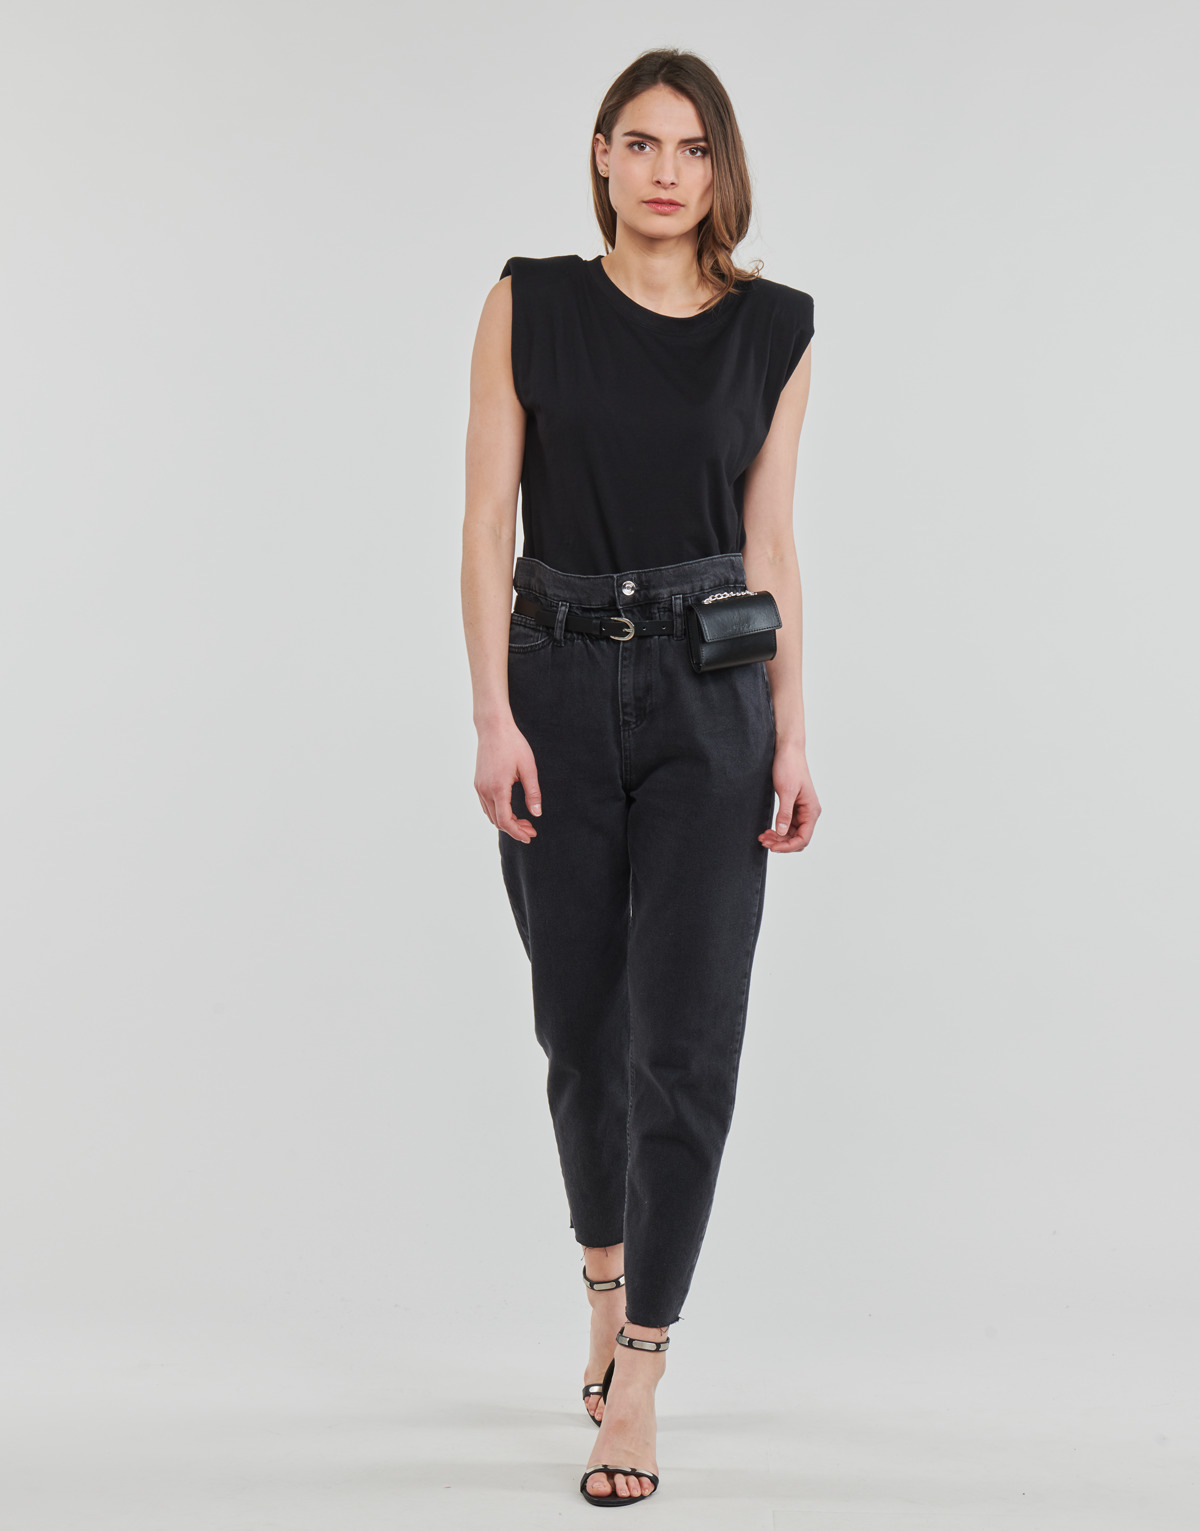 Liu Jo CANDY HIGH WAIST Black - Fast delivery  Spartoo Europe ! - Clothing straight  jeans Women 148,80 €